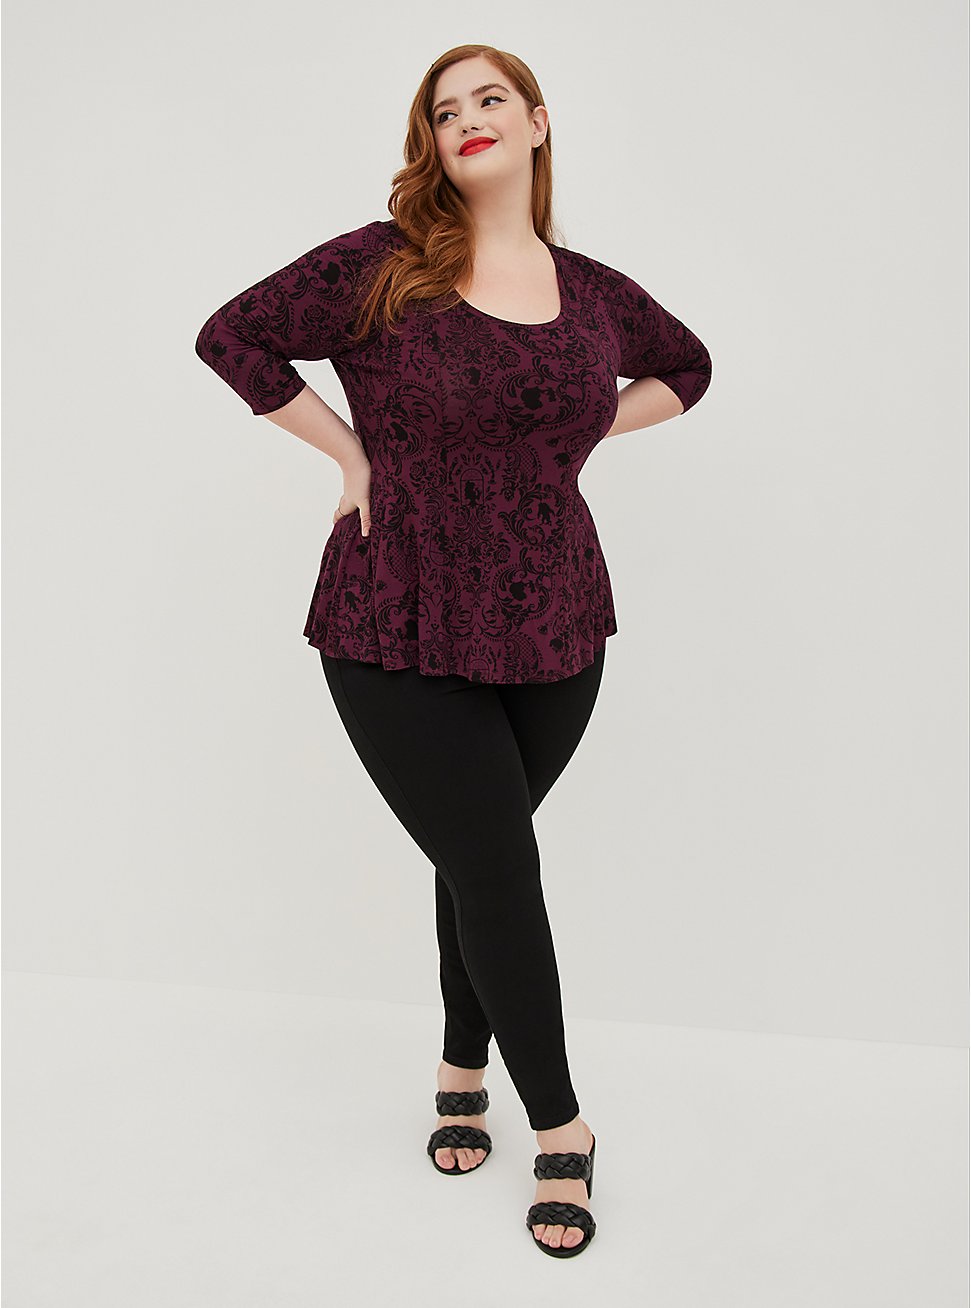 Fit & Flare Top - Damask Disney Beauty & The Beast, MULTI, hi-res